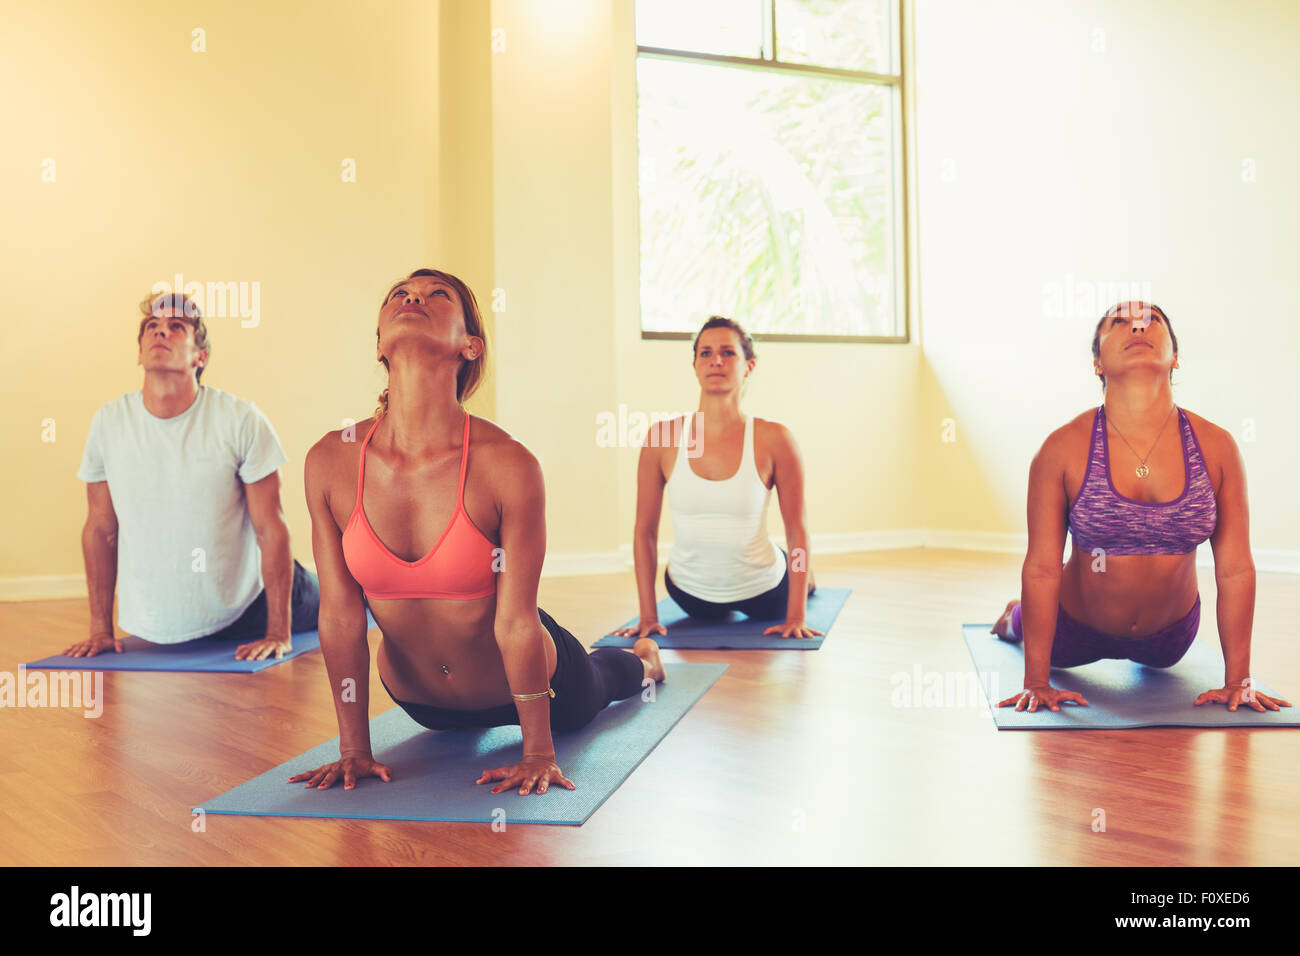 Group of People Relaxing and Doing Yoga. Practicing Cobra Pose. Wellness and Healthy Lifestyle. Stock Photo